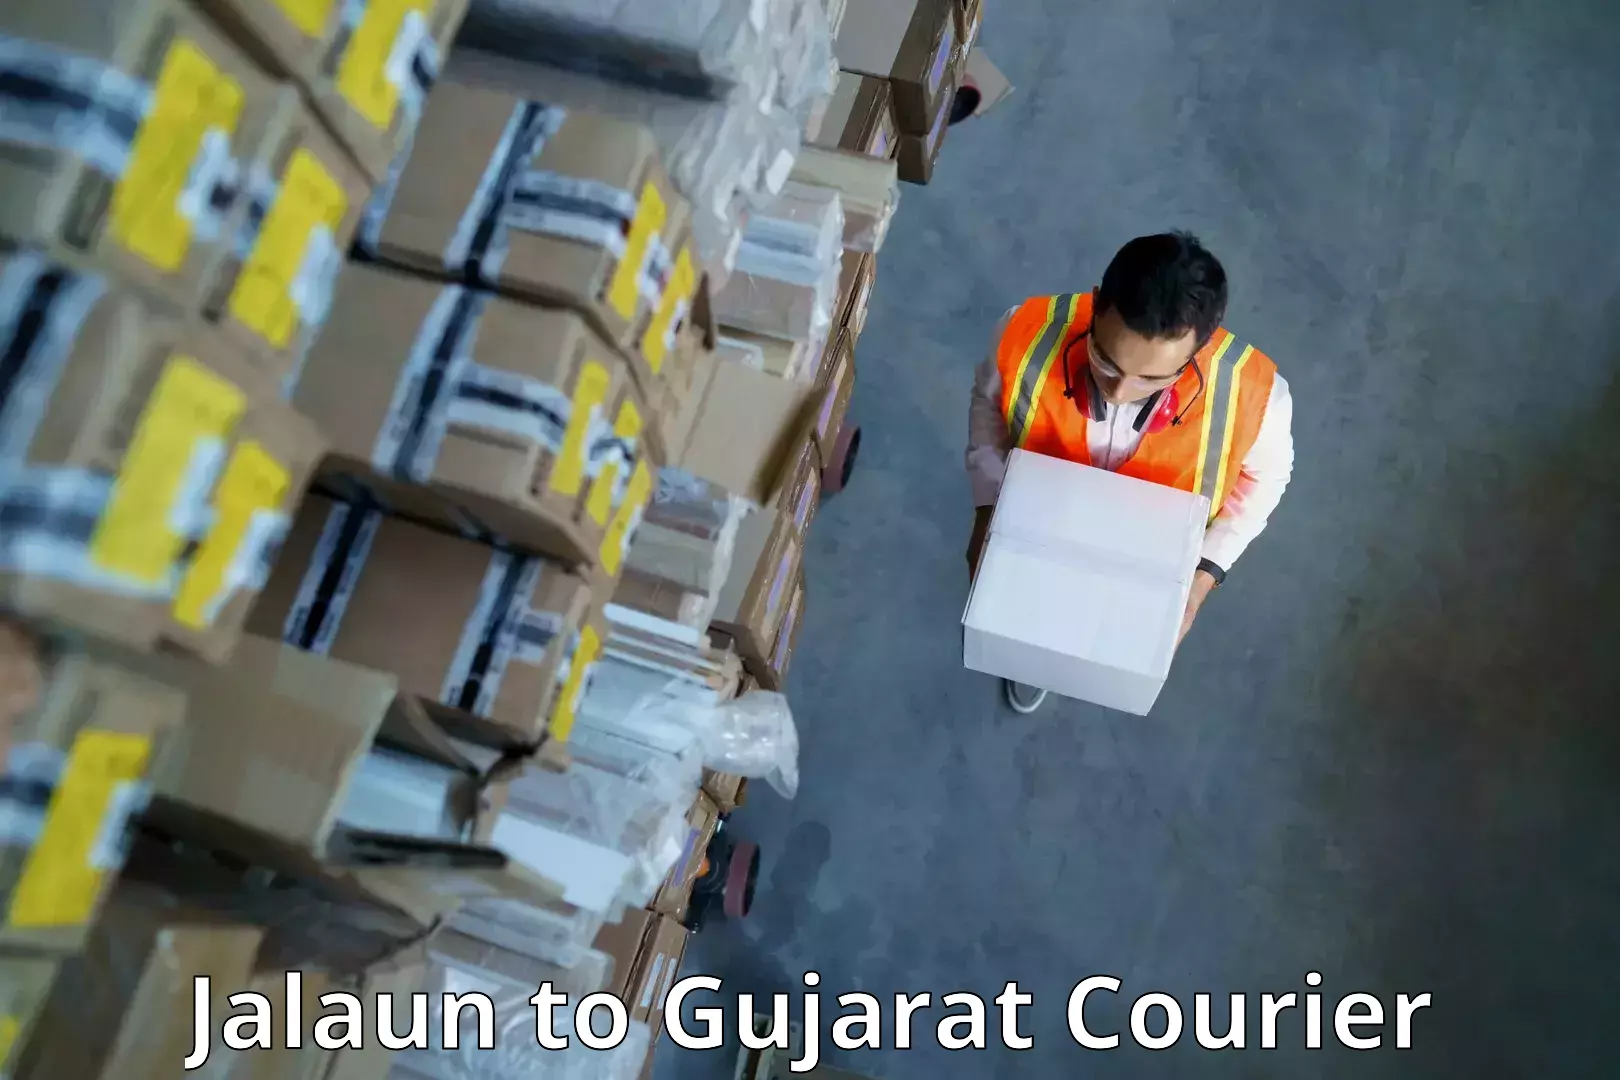 Global courier networks Jalaun to Ahmedabad